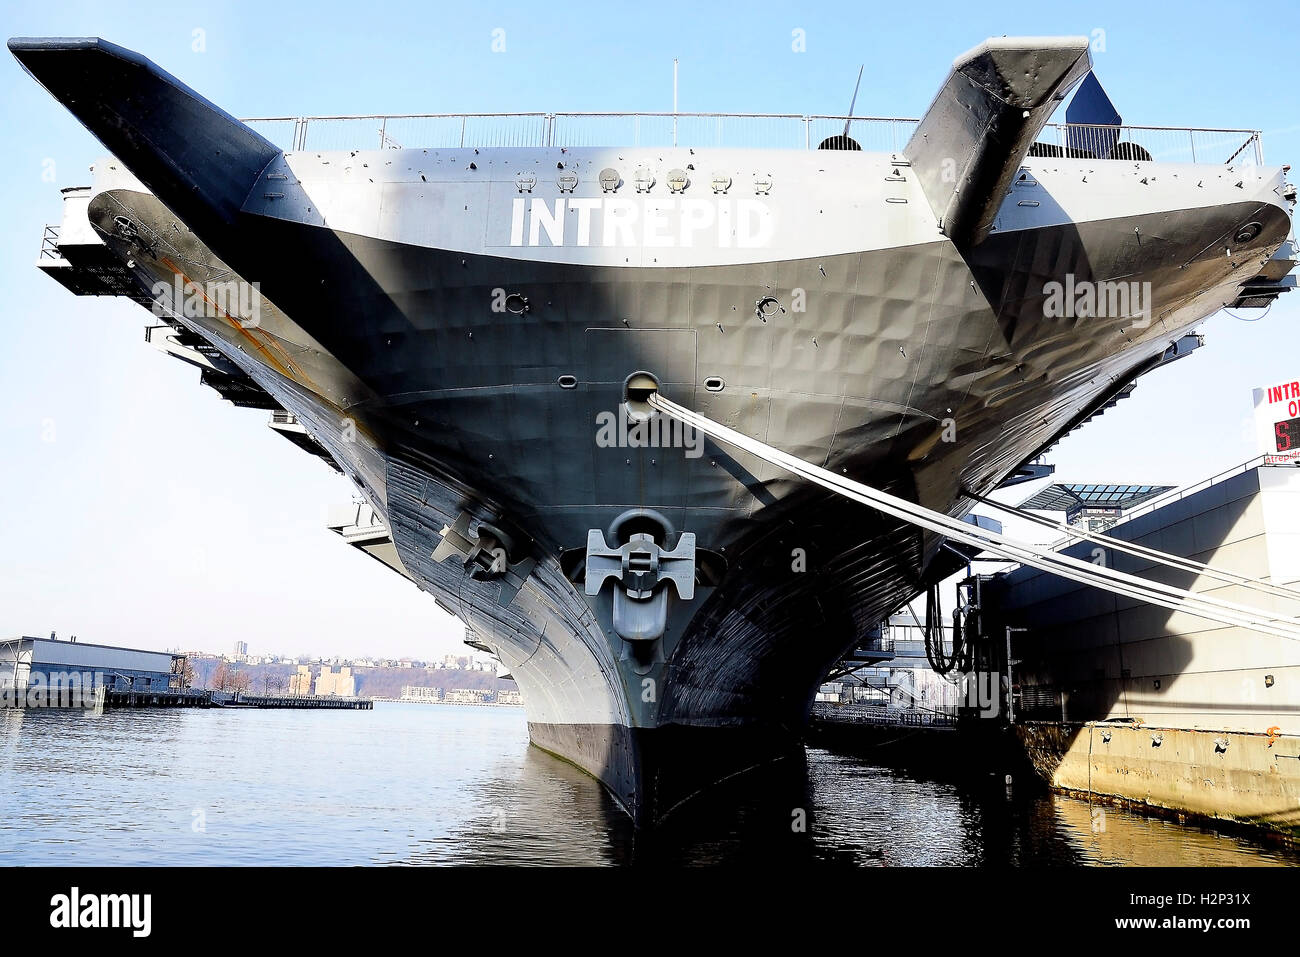 Aircraft carrier USS Intrepid Sea, Air & Space Museum located on the West side of Manhattan on Pier 86, 12th Ave. & 46th Street - NYC Stock Photo